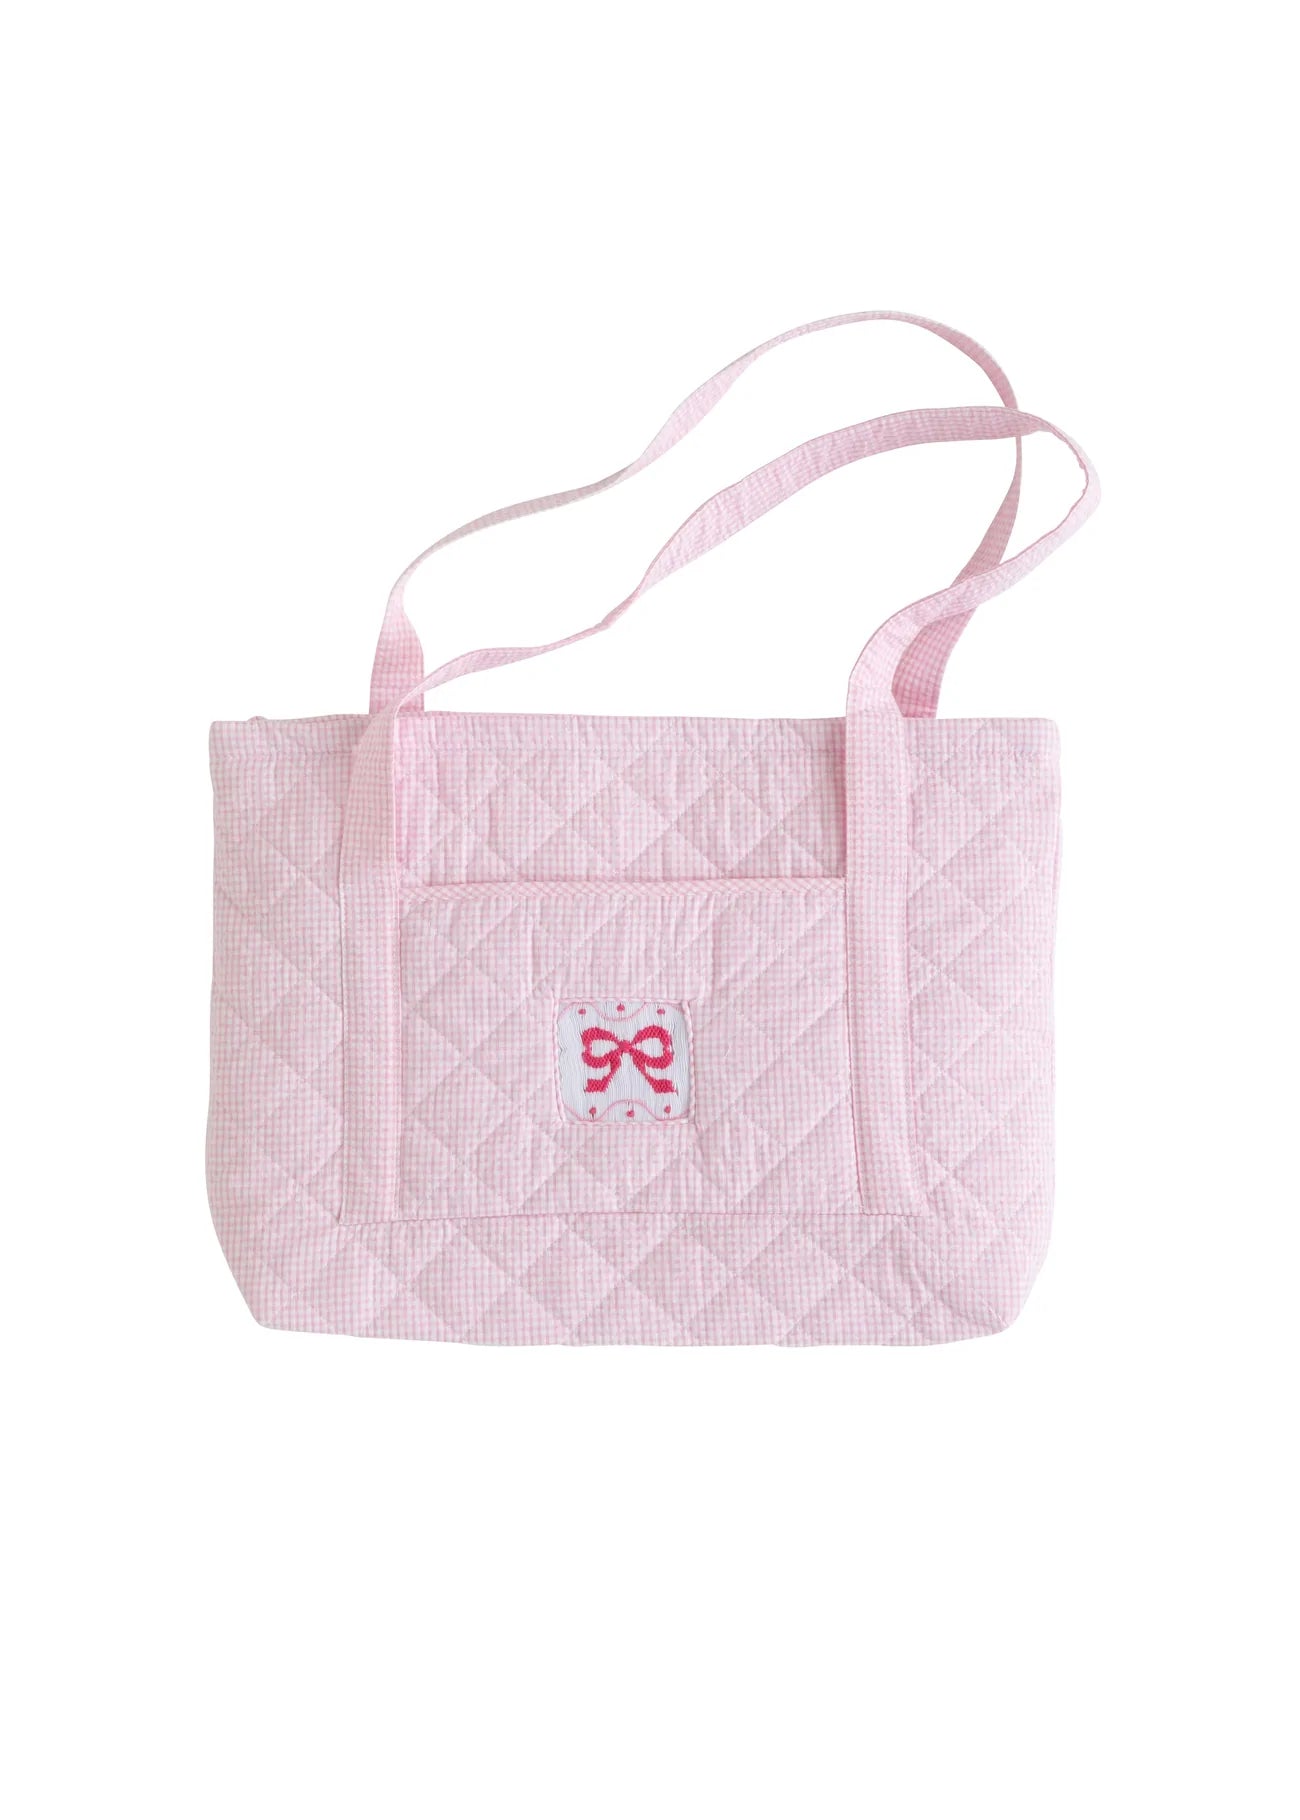 Quilted Luggage Tote - Pink Bow